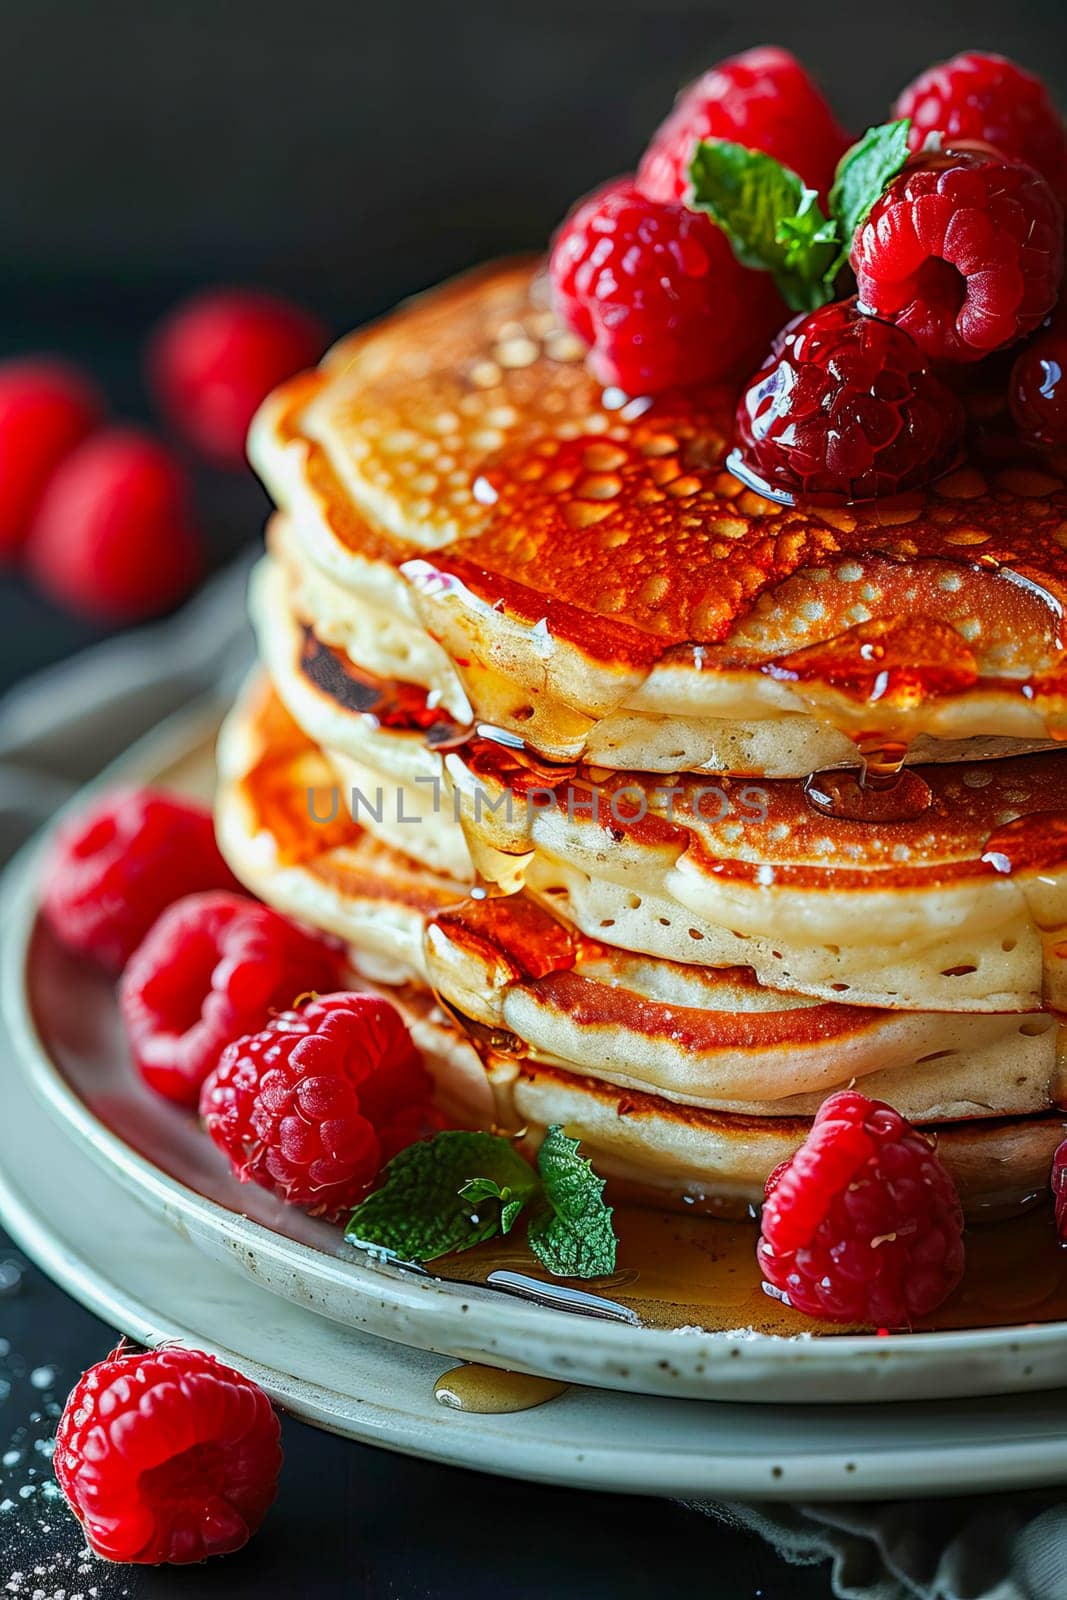 Pancakes with fresh raspberries and honey close-up, delicious and healthy summer food.